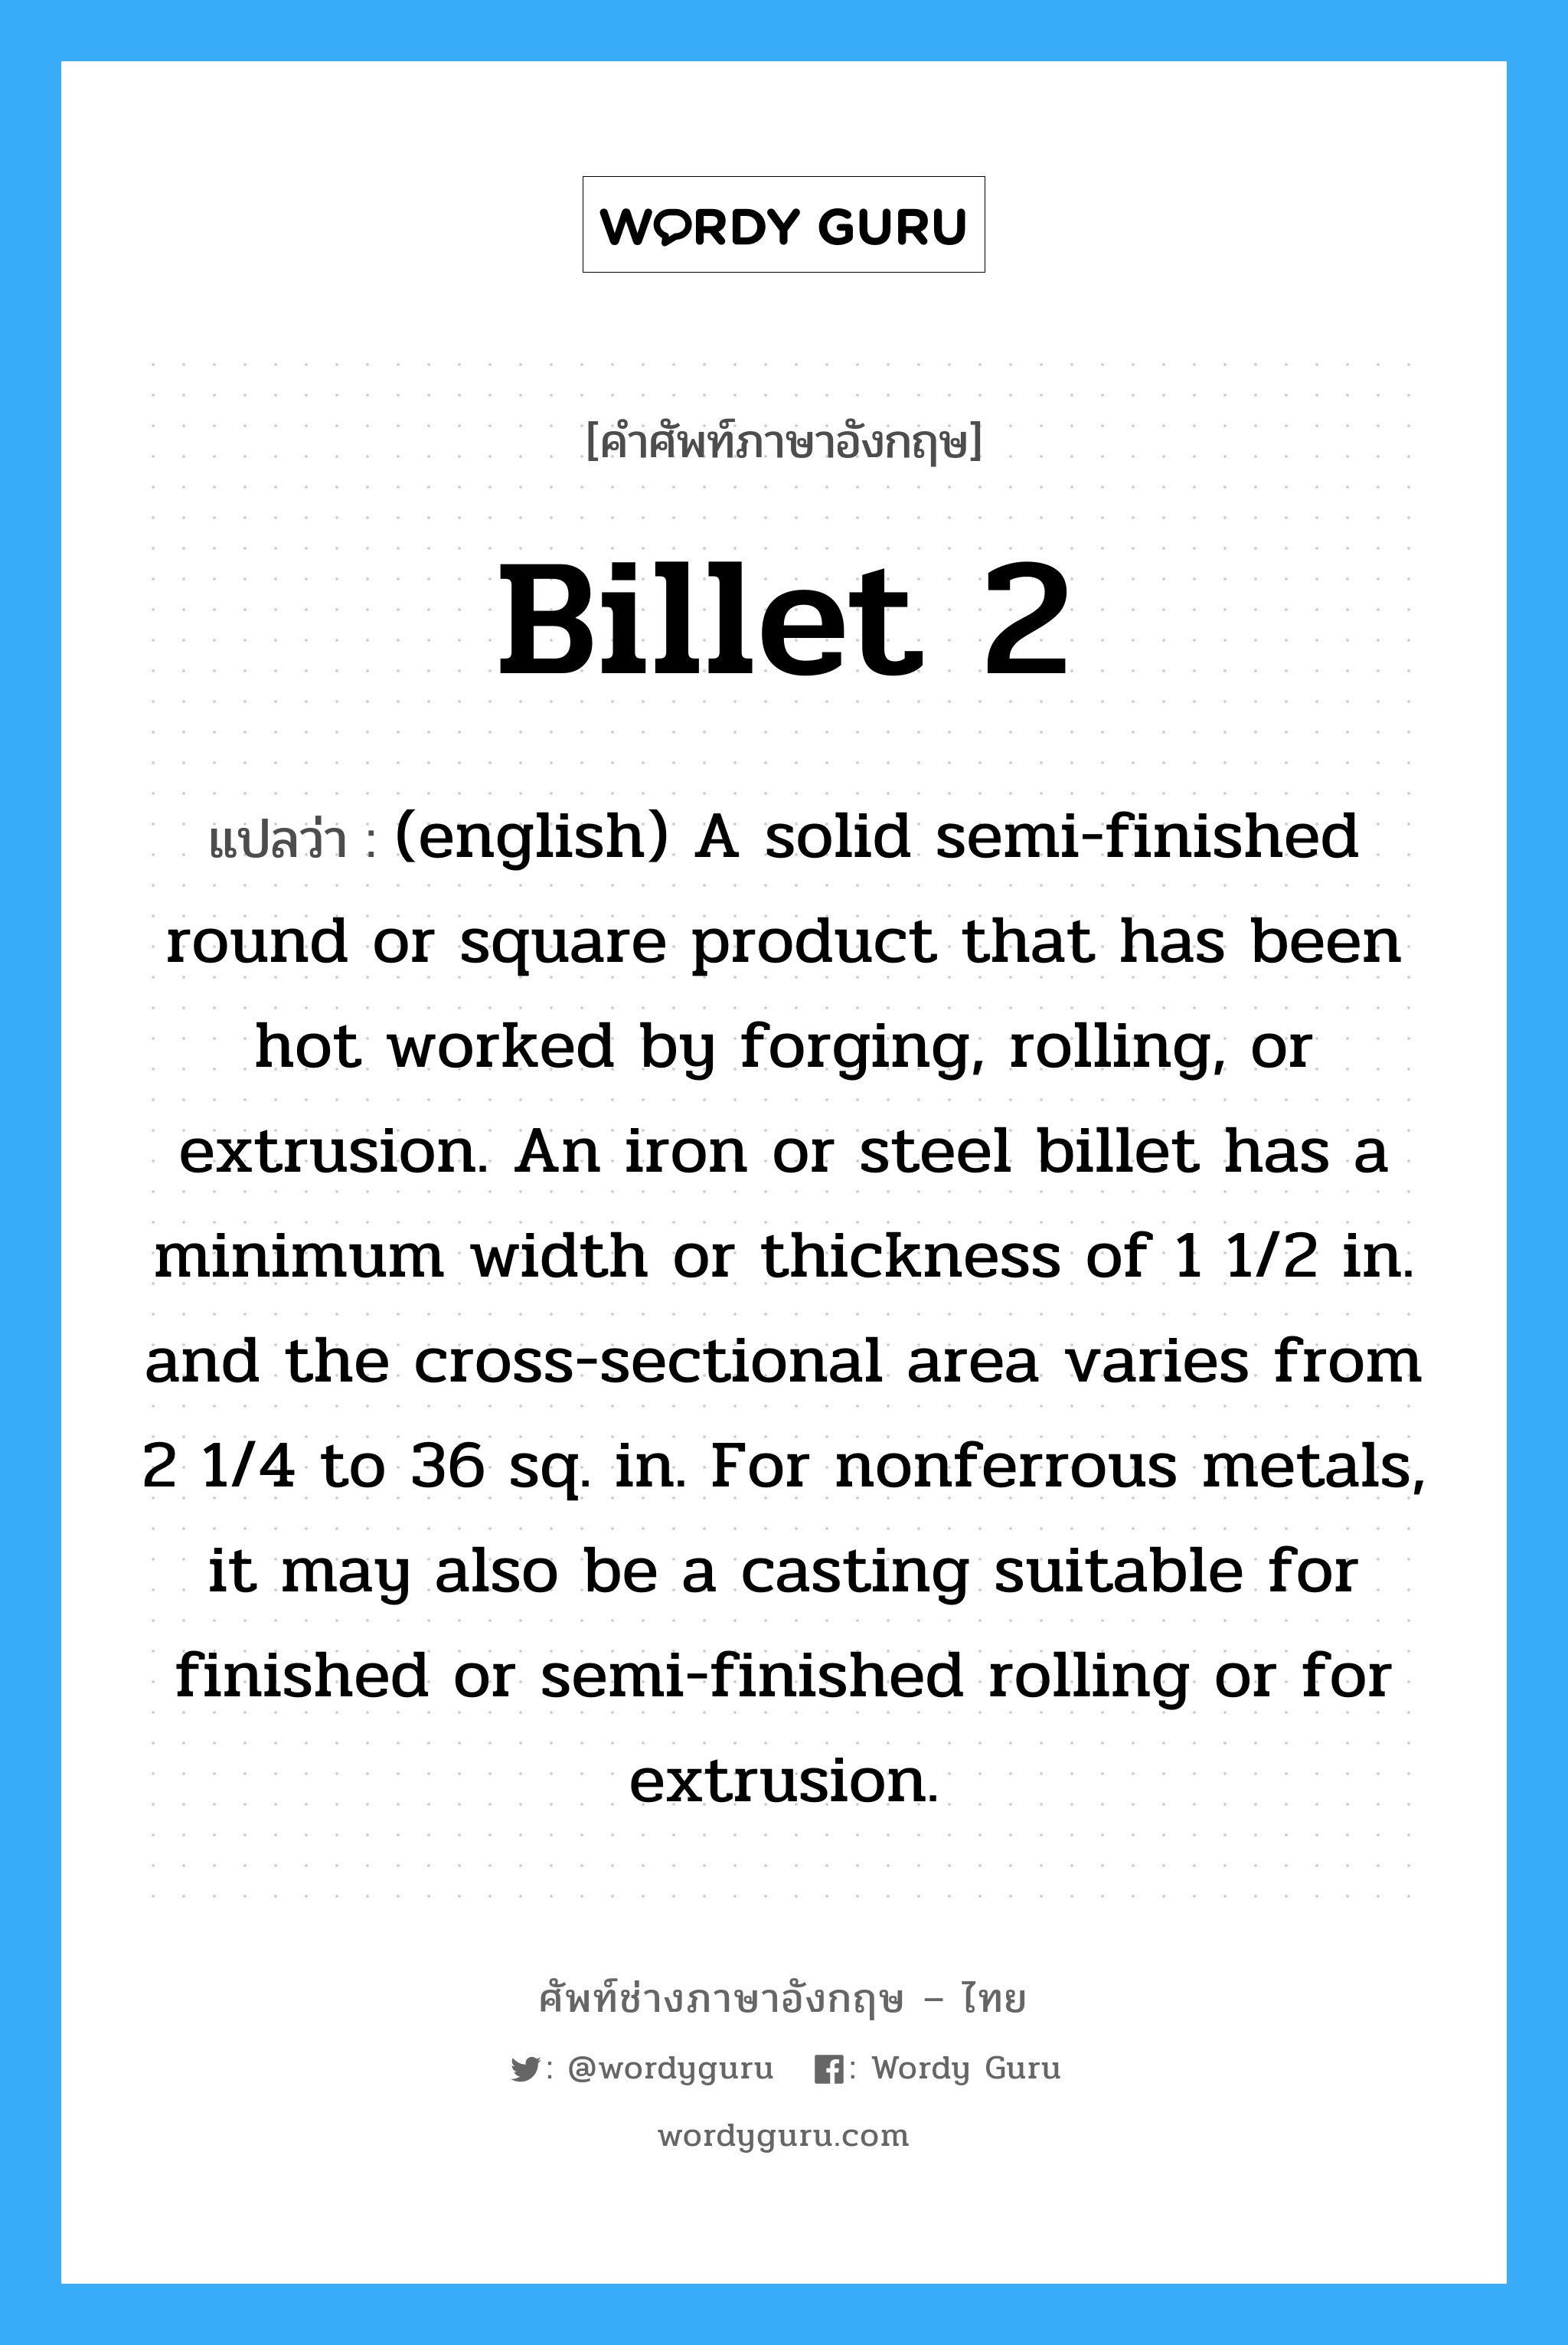 Billet 2 แปลว่า?, คำศัพท์ช่างภาษาอังกฤษ - ไทย Billet 2 คำศัพท์ภาษาอังกฤษ Billet 2 แปลว่า (english) A solid semi-finished round or square product that has been hot worked by forging, rolling, or extrusion. An iron or steel billet has a minimum width or thickness of 1 1/2 in. and the cross-sectional area varies from 2 1/4 to 36 sq. in. For nonferrous metals, it may also be a casting suitable for finished or semi-finished rolling or for extrusion.